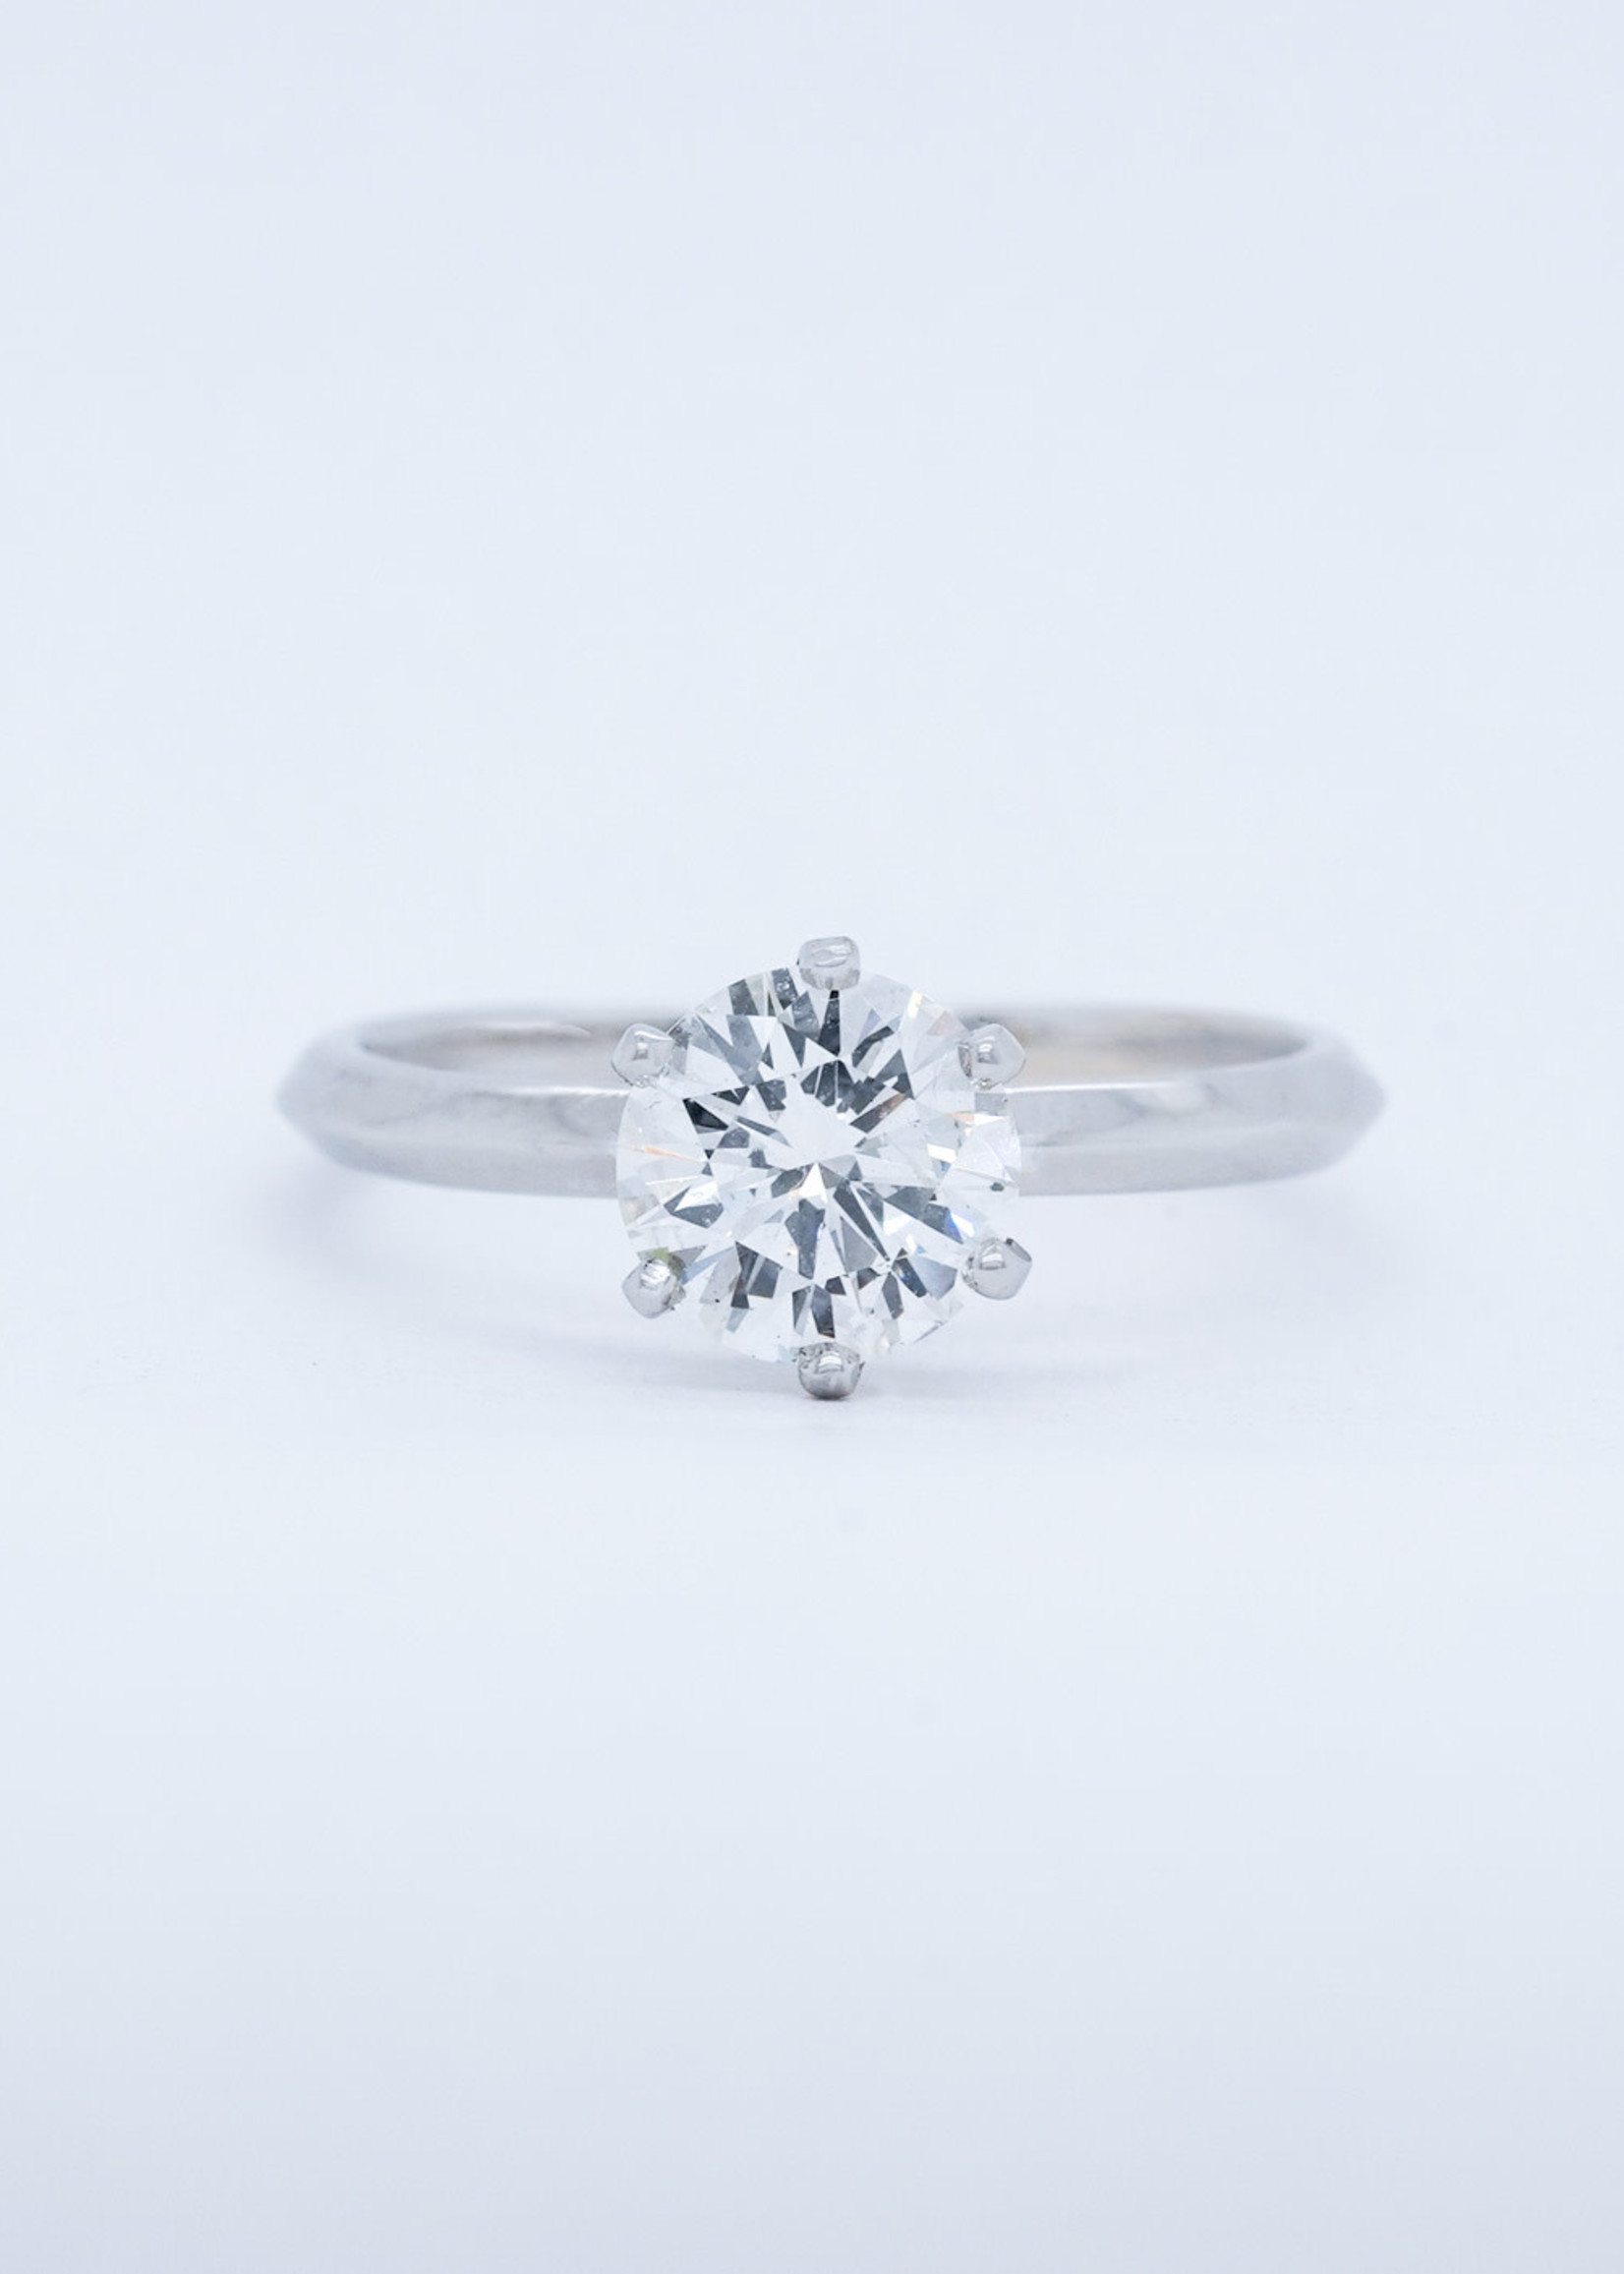 14KW 2.30g 1.08ct G/SI1 GIA Solitaire Engagement Ring (size 6)